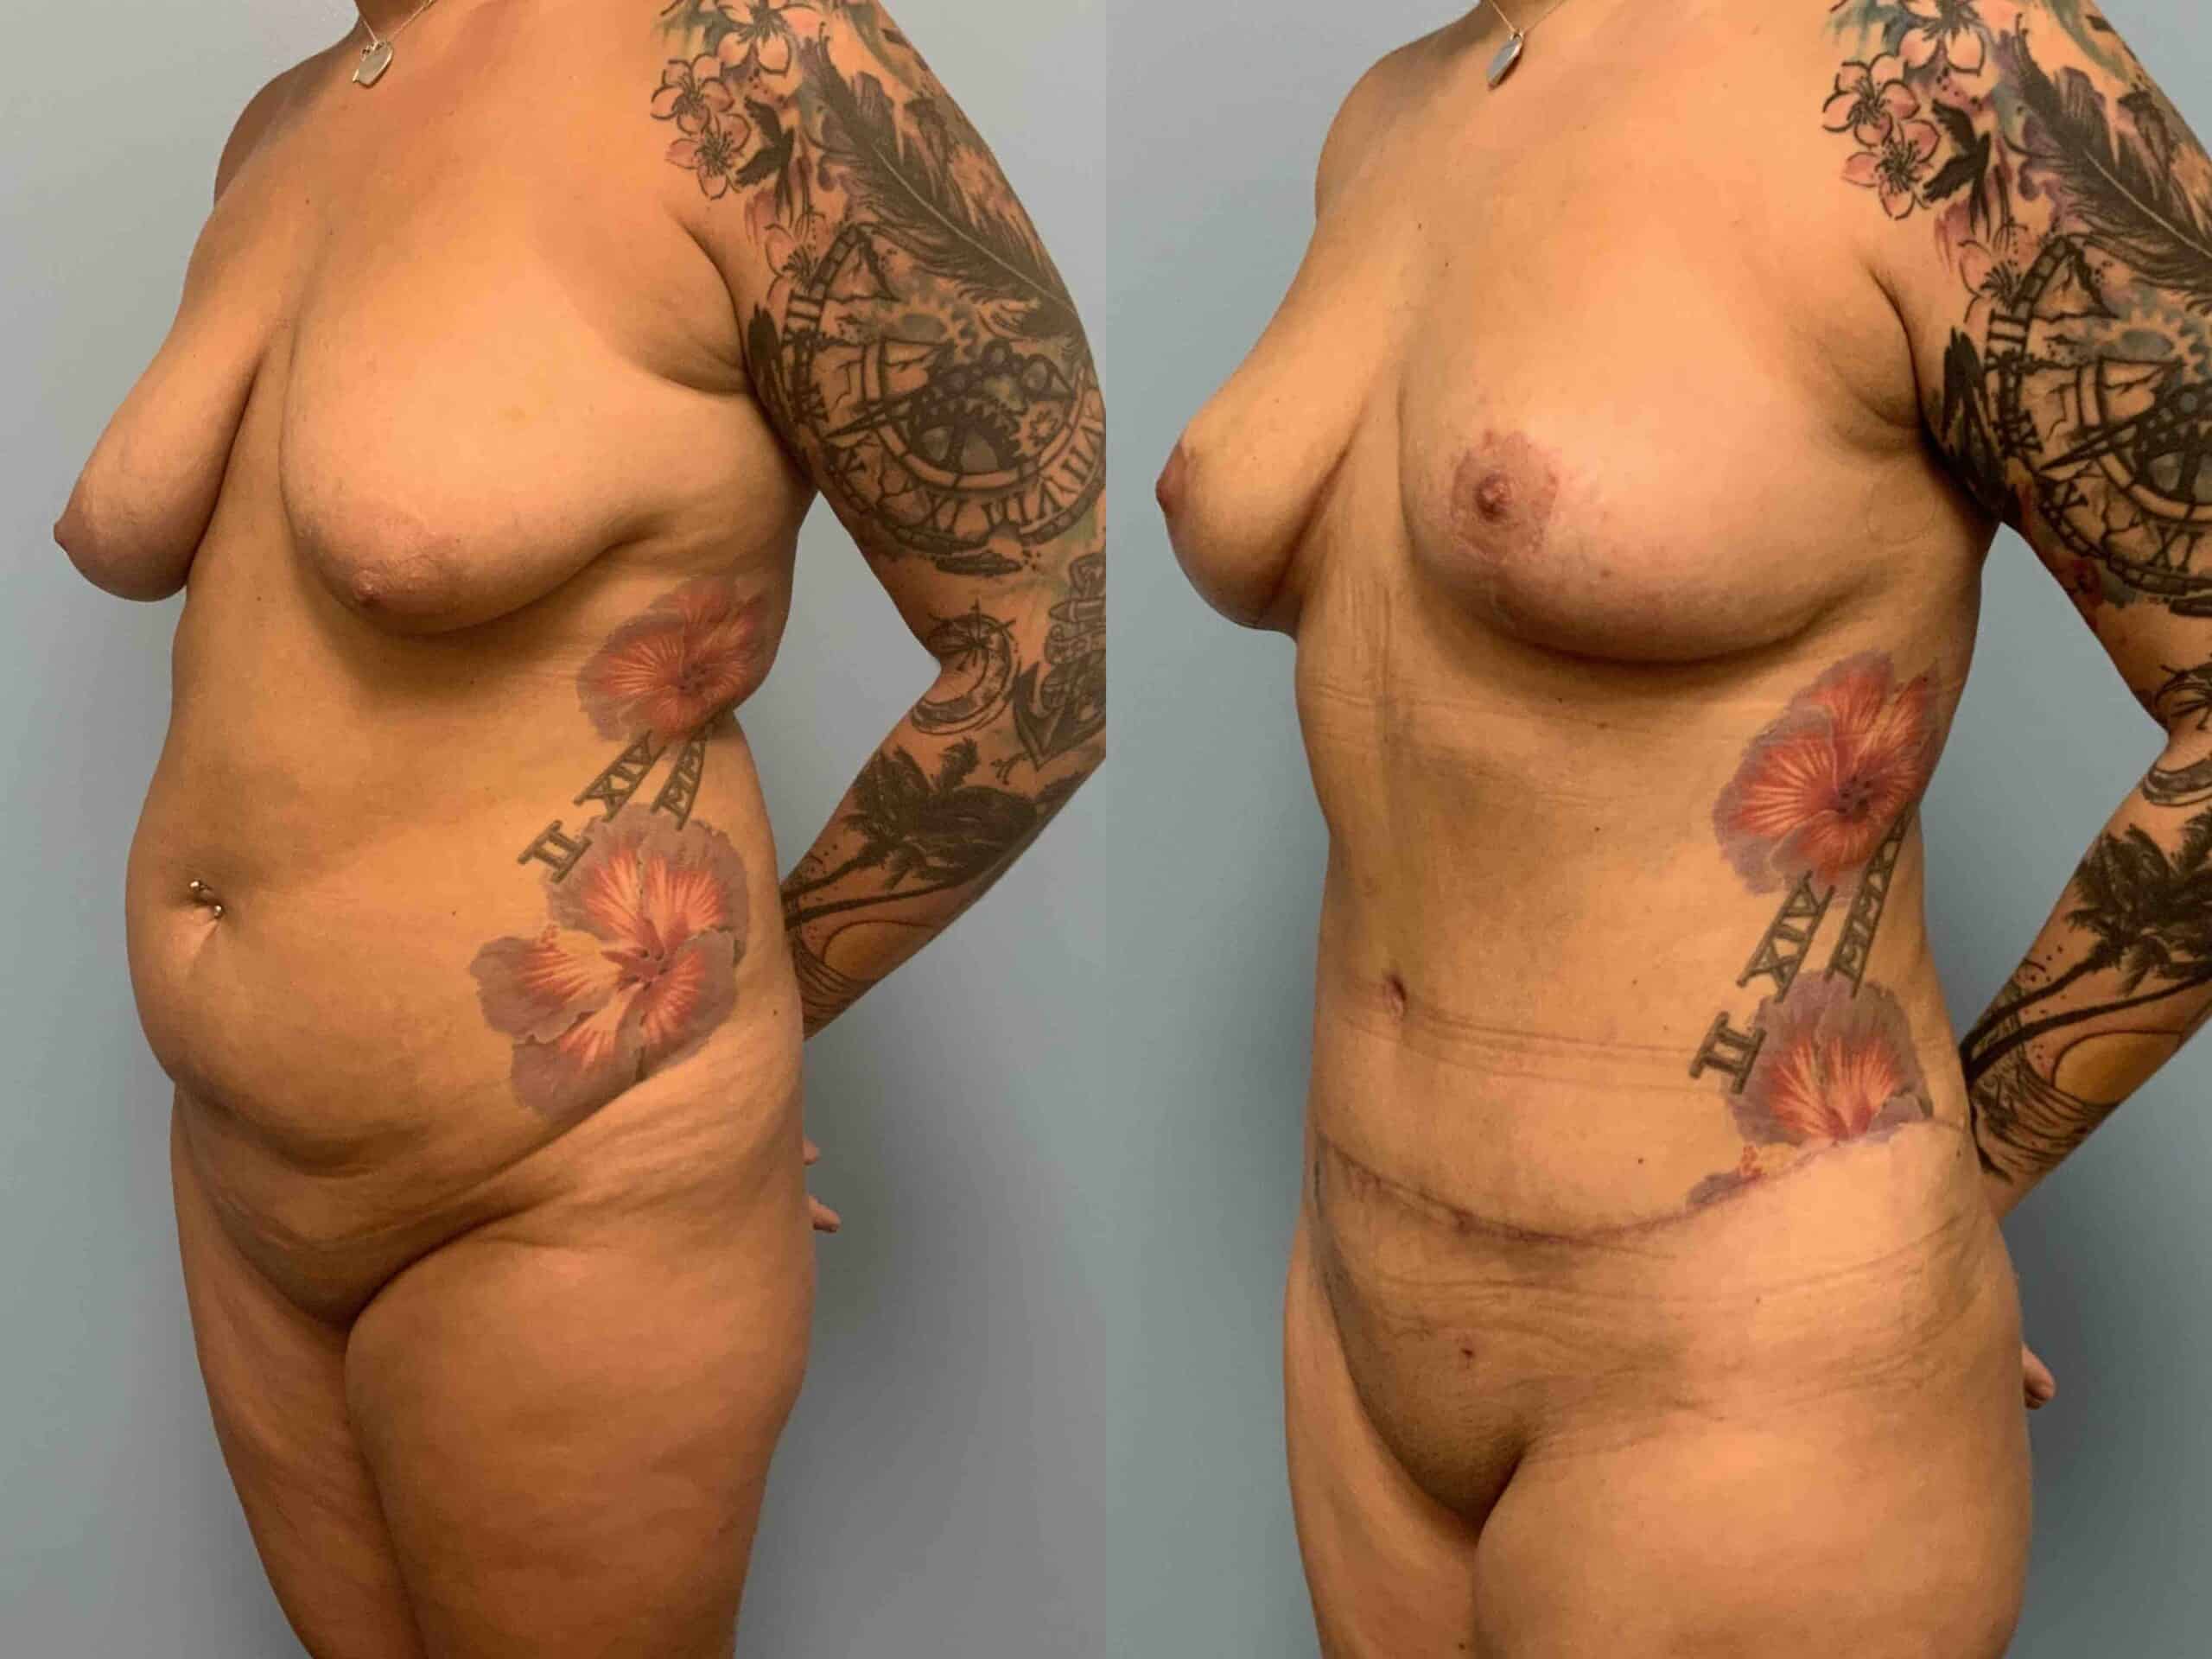 Before and after, 1 mo post op from VASER Abdomen, Axilla, Flanks, and Mons, Tummy Tuck, Breast Lift/Mastopexy performed by Dr. Paul Vanek (diagonal view)